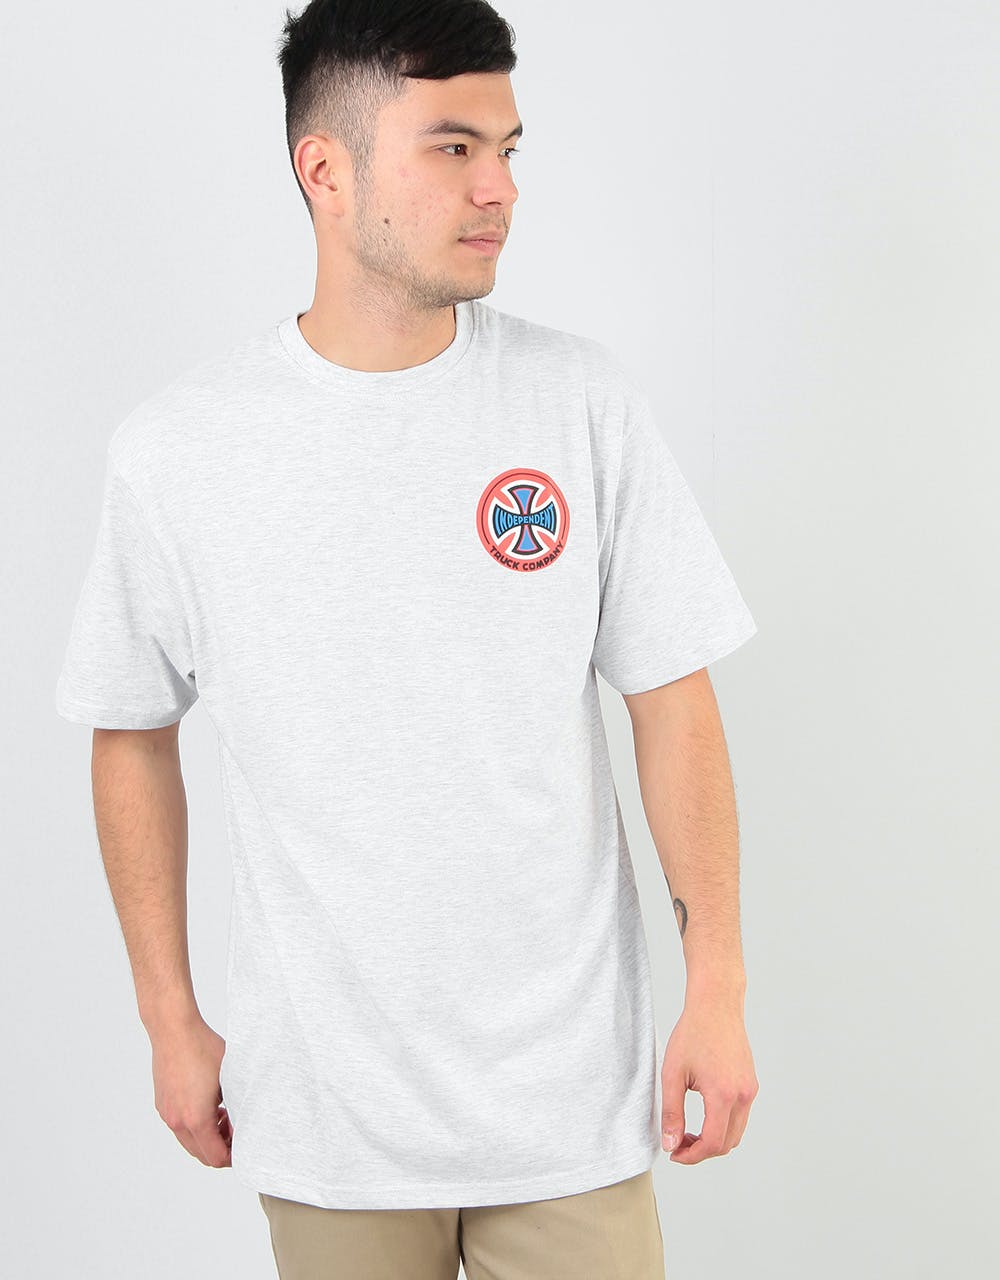 Independent O.G.T.C. T-Shirt - Athletic Heather